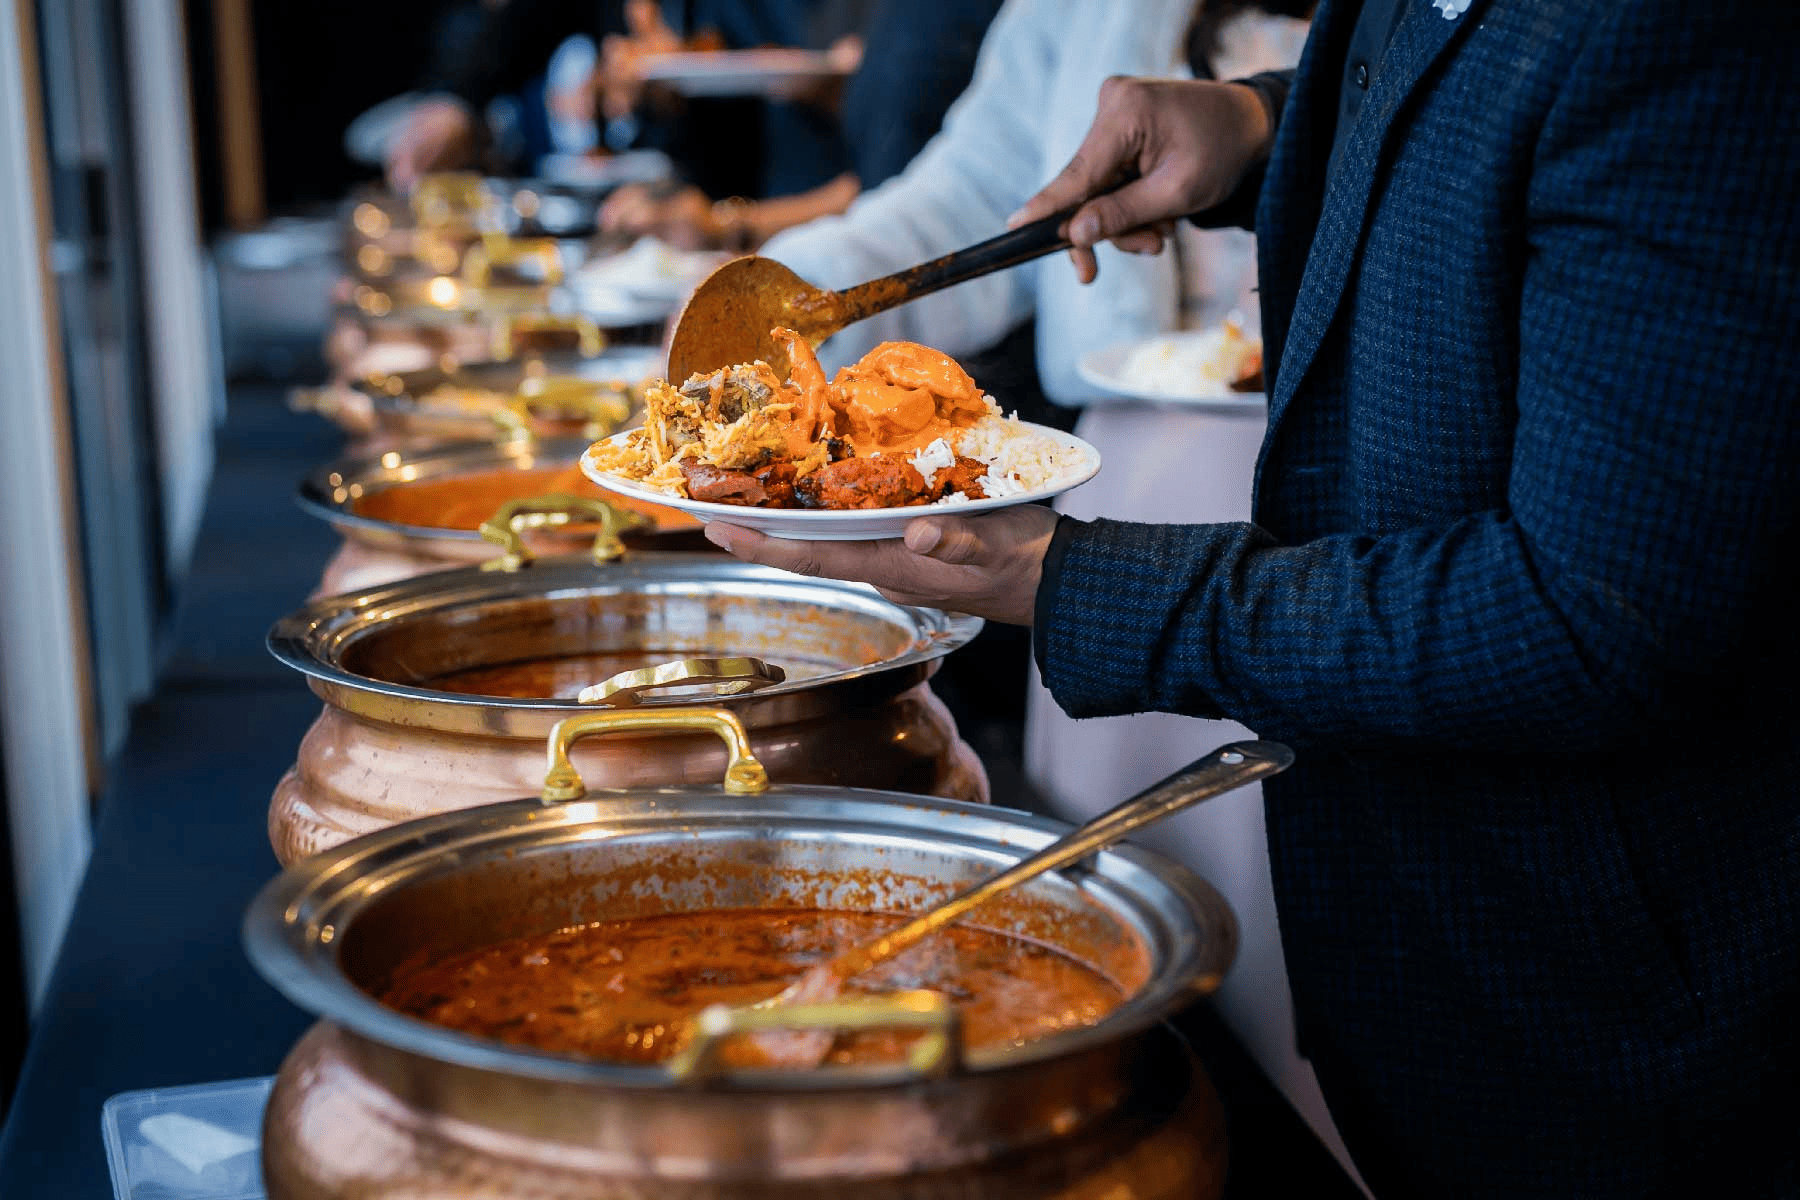 DIY Indian food catering ideas for big events like potluck-style events and finger foods